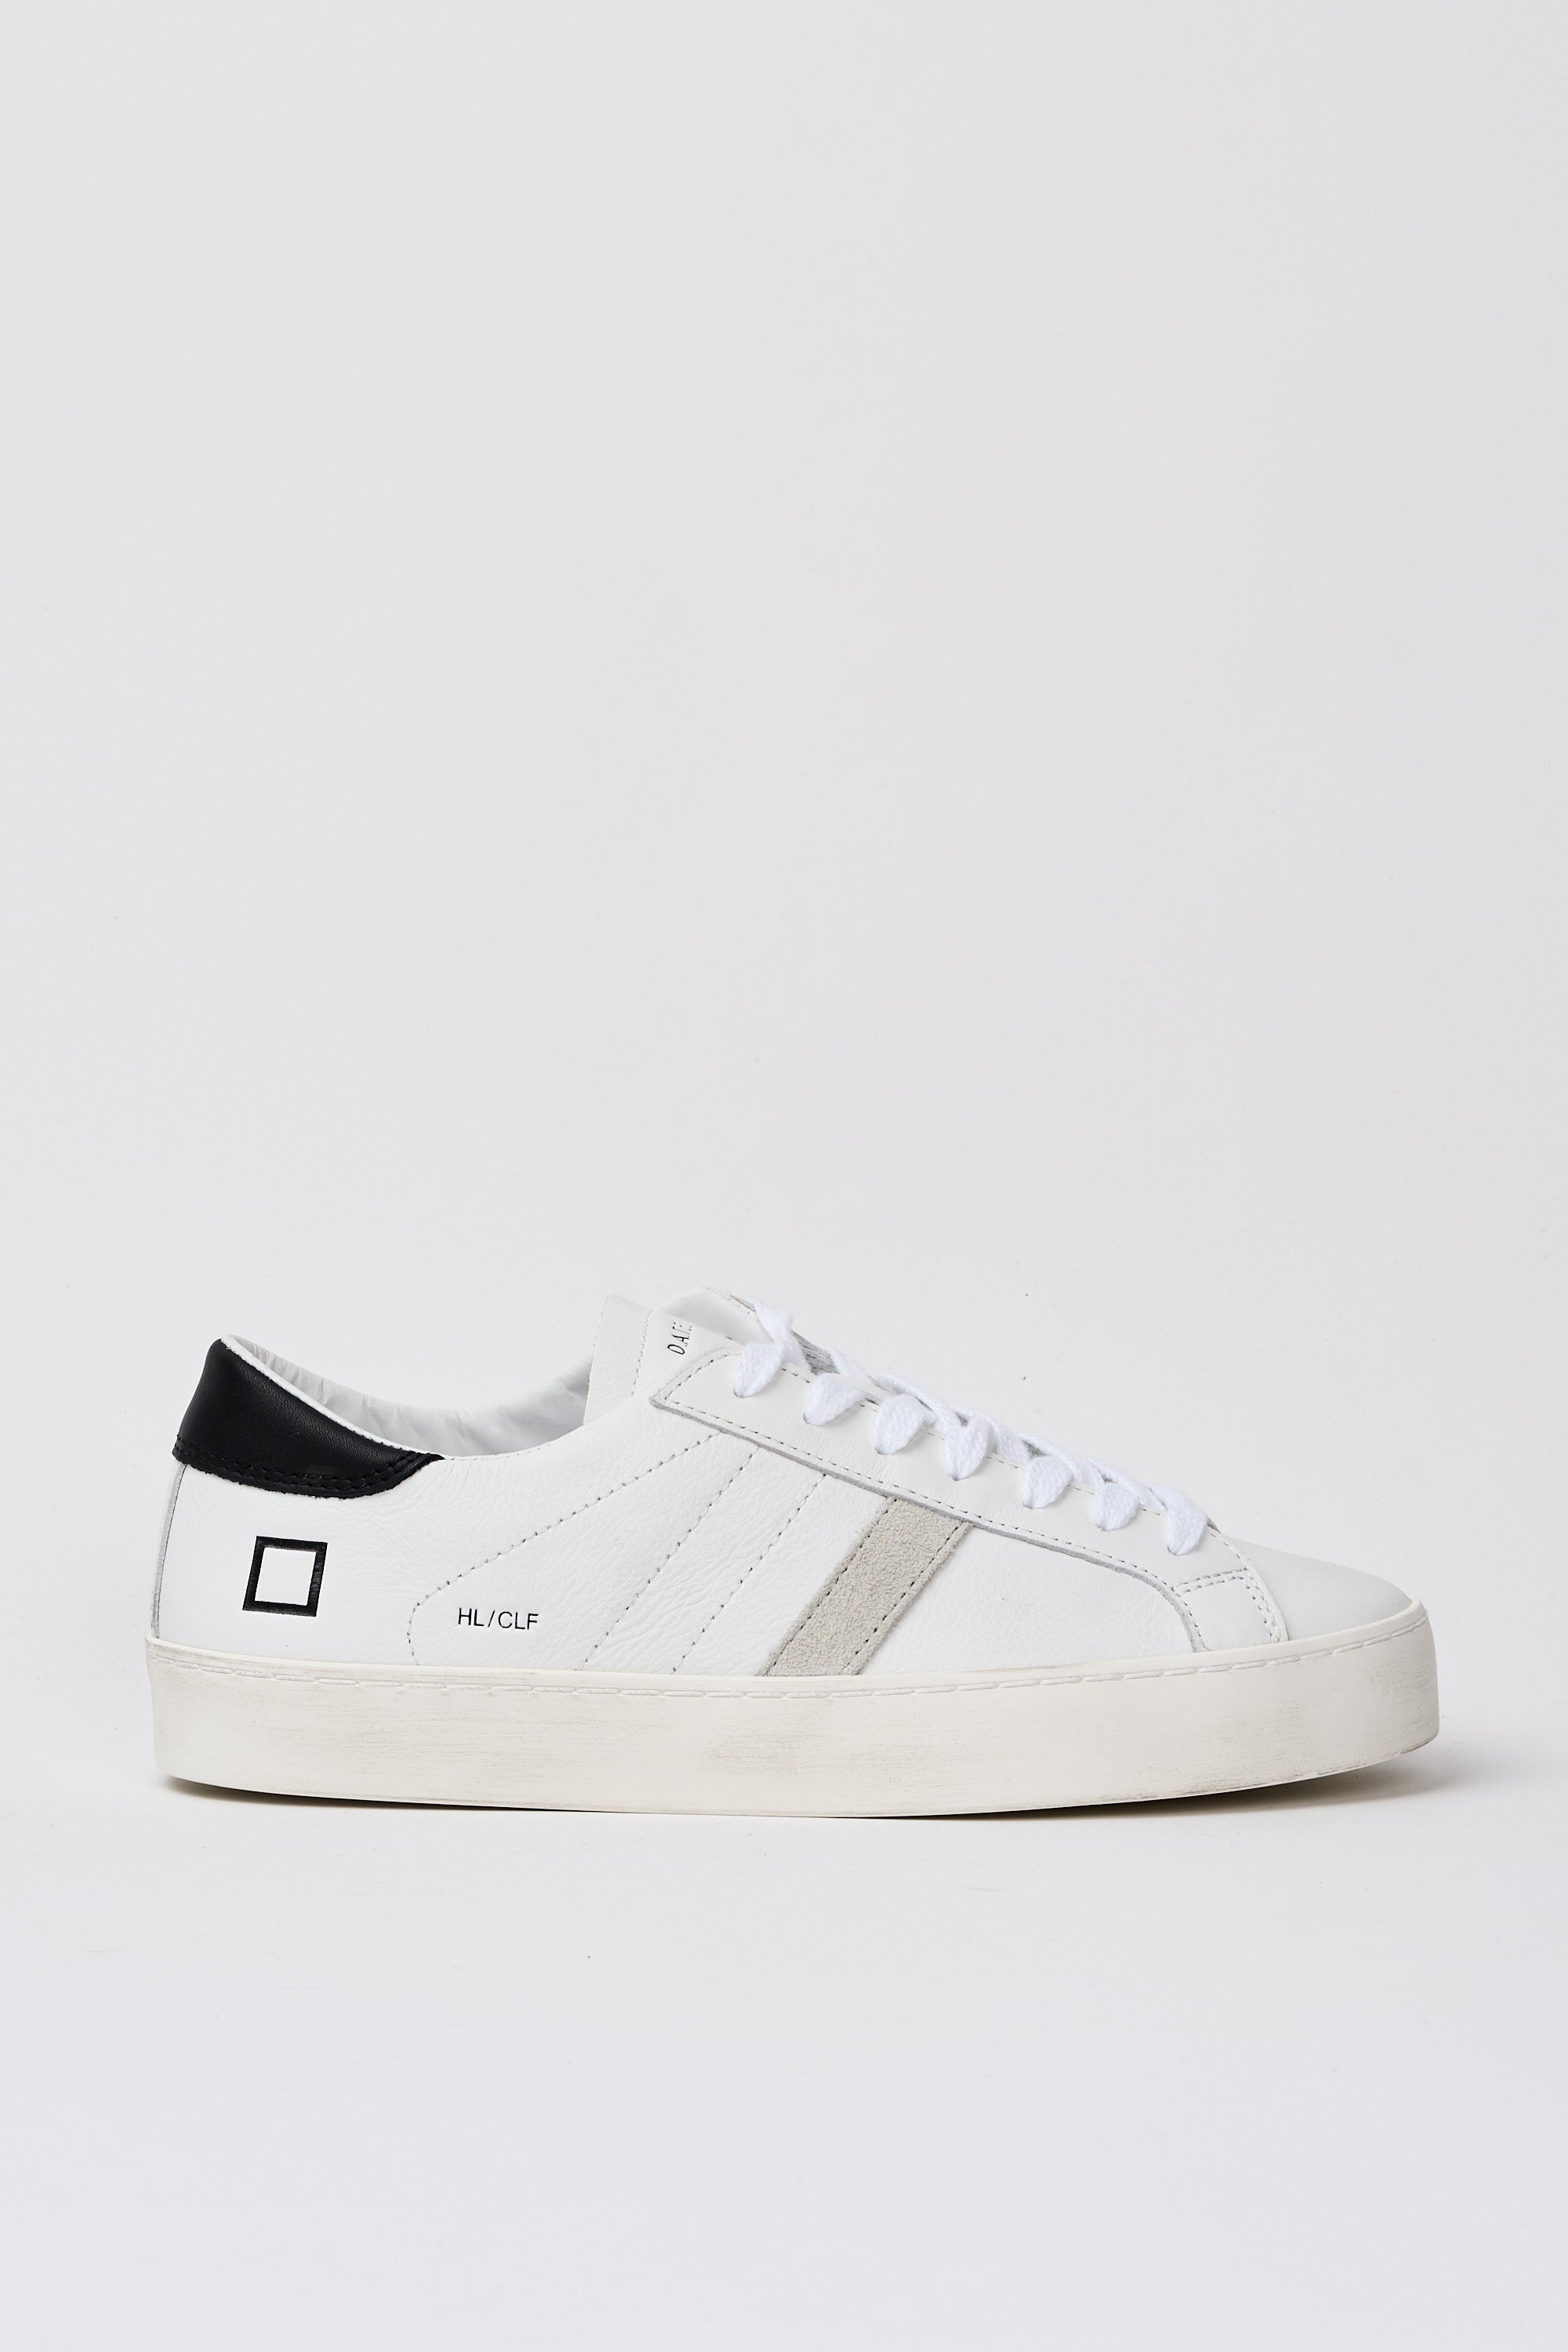 D.A.T.E. Sneaker Hill Leather/Suede White/Black-1